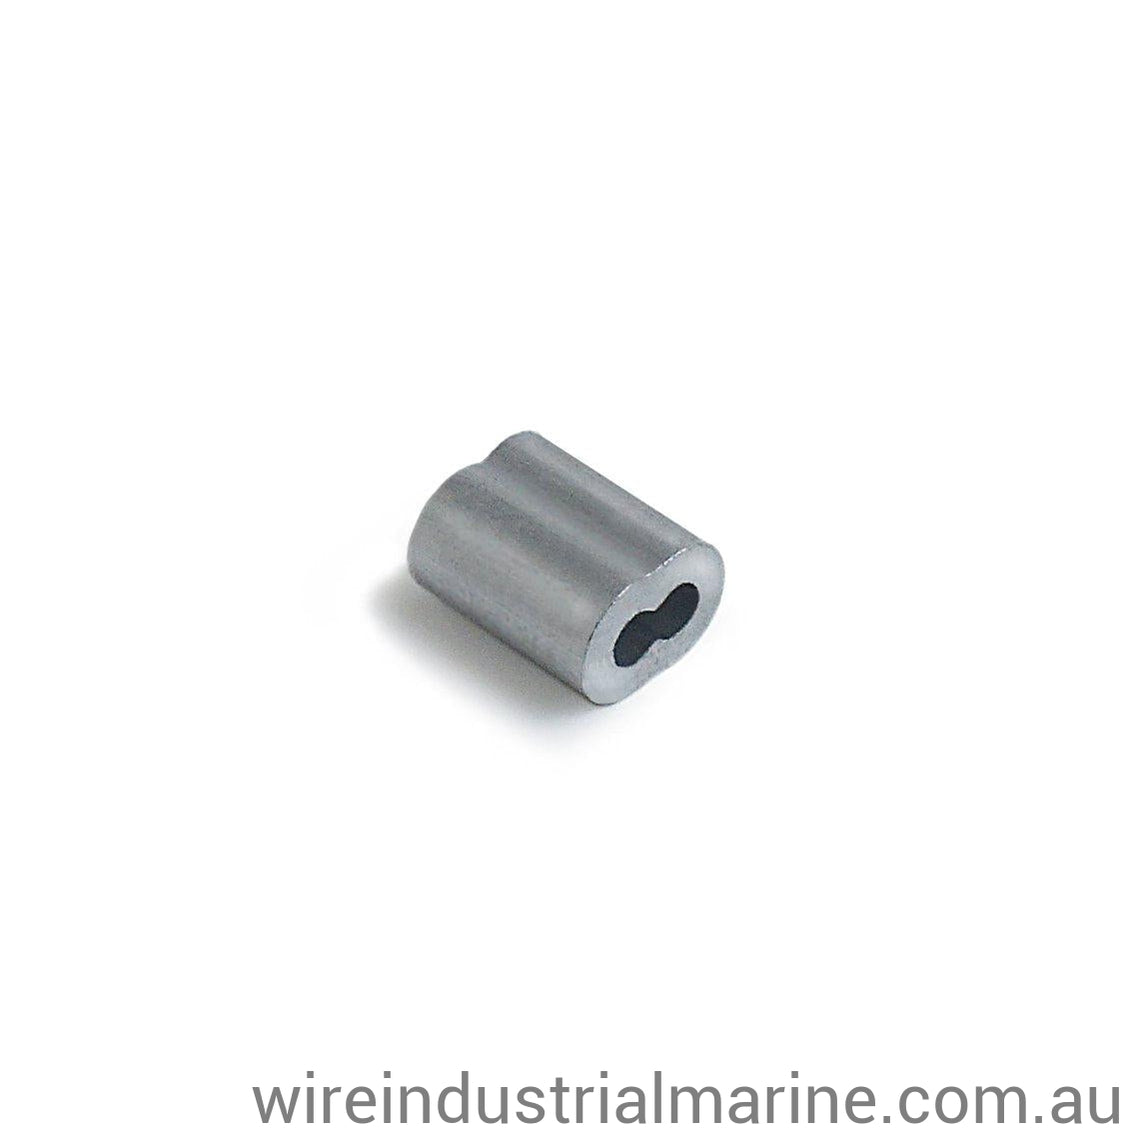 1.6mm Alloy swage for wire rope-AS-1.6-wireindustrialmarine